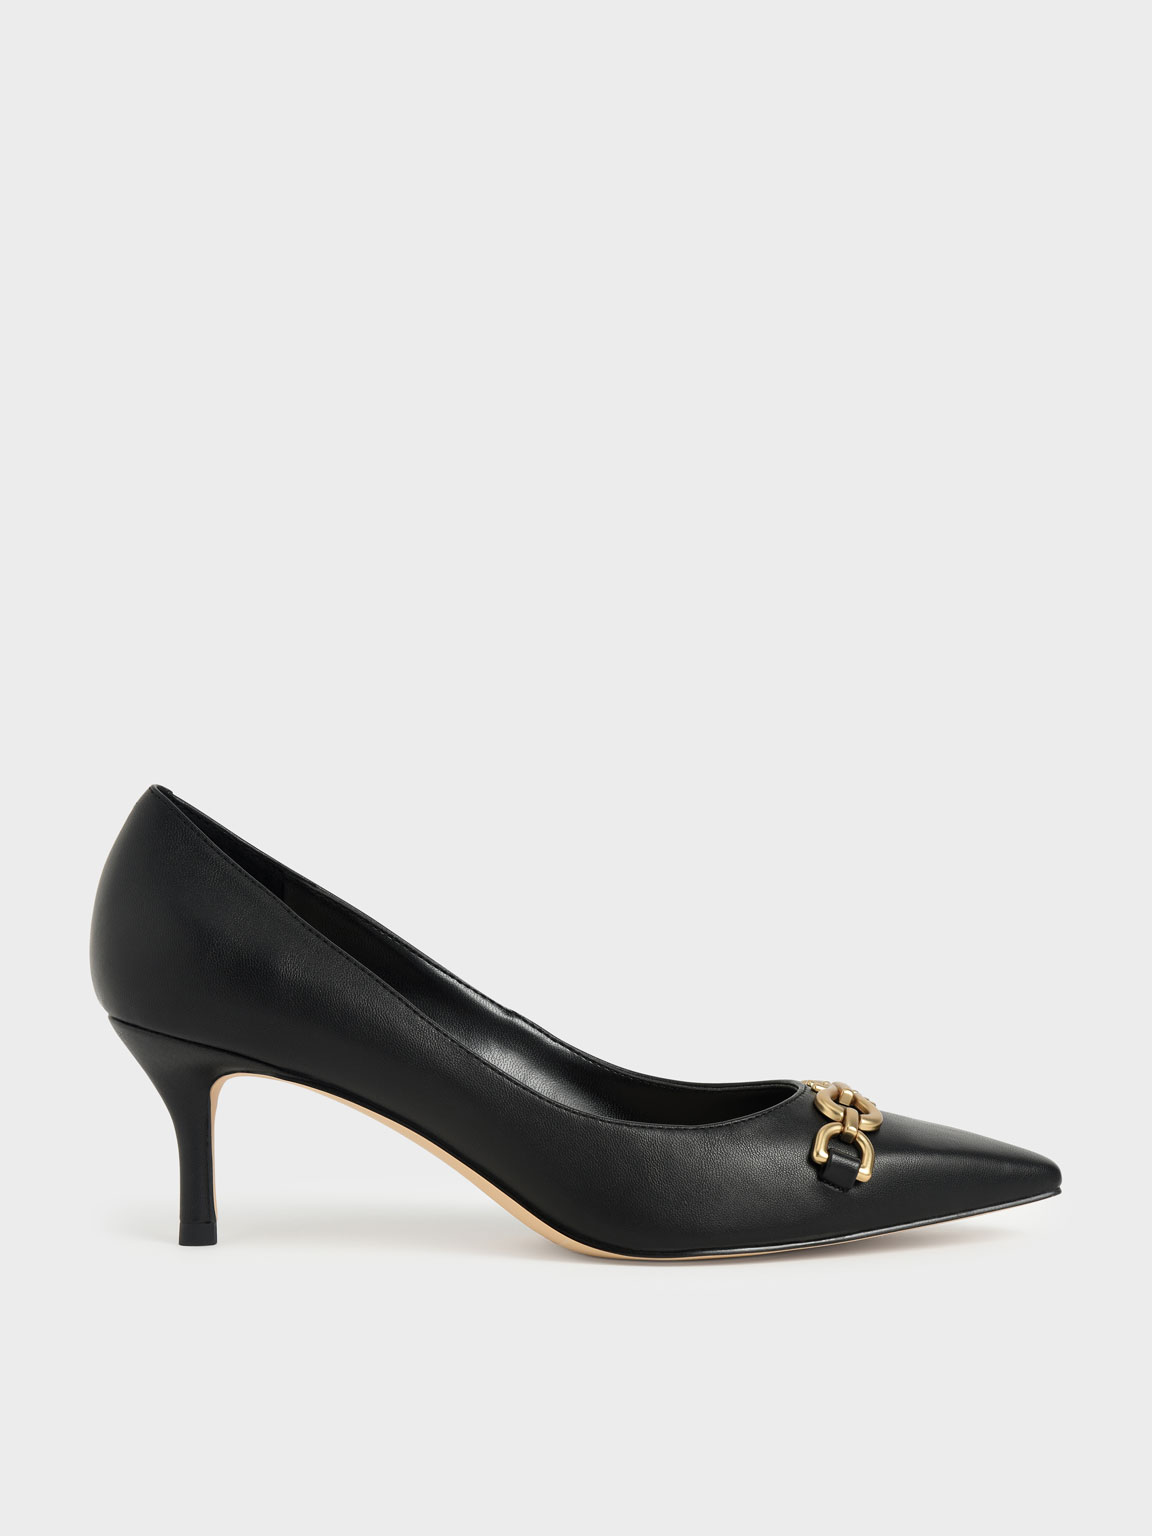 Black Chain Link Pointed Toe Pumps - CHARLES & KEITH DE